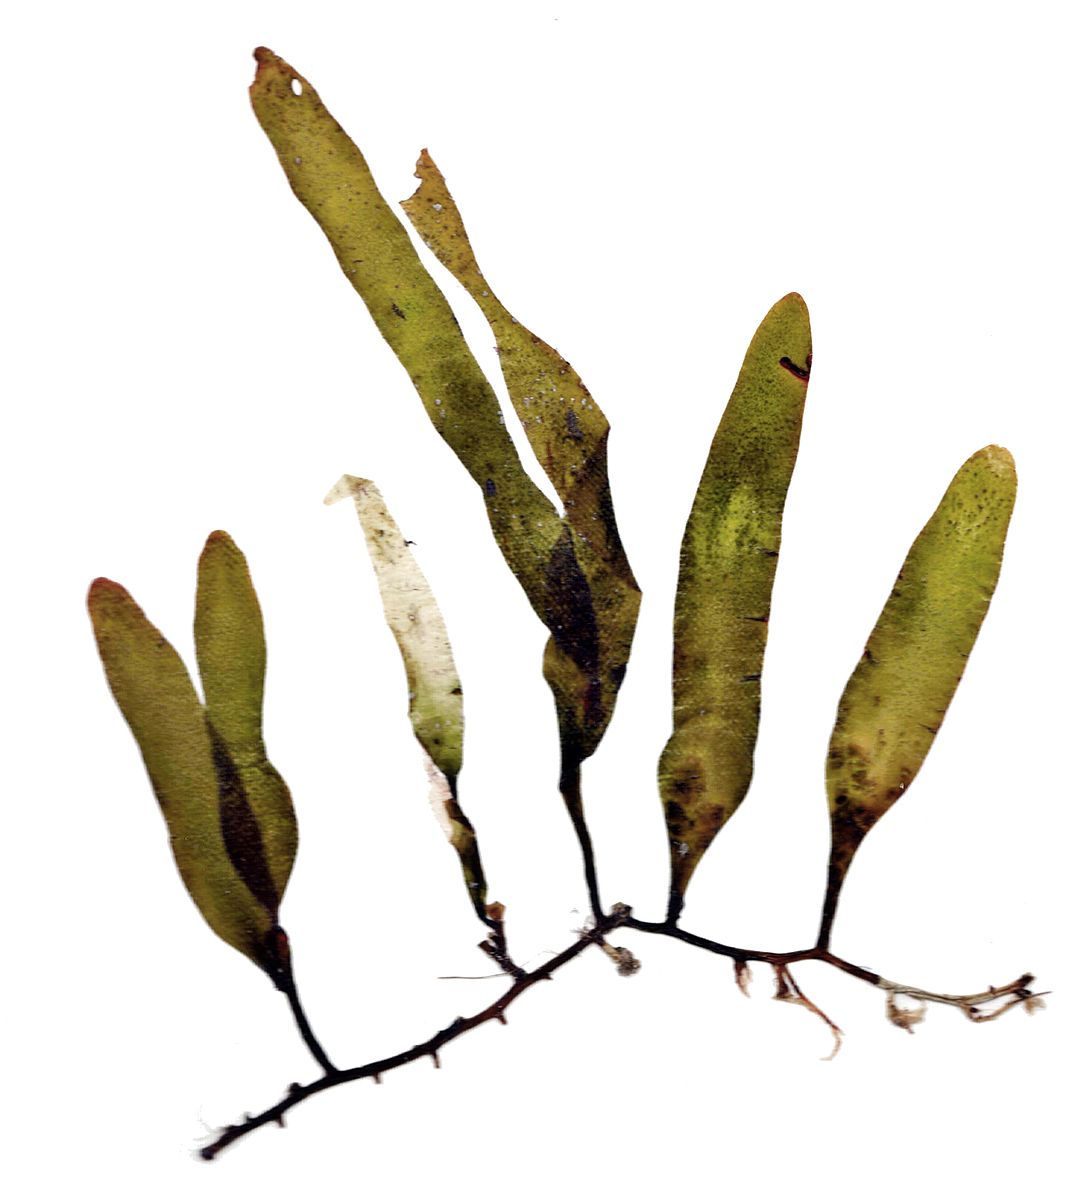 Five dark green blades (one which has a discolored white tip) of Caulerpa of varying sizes linked by one thin, dark brown stolon which are fixed to the sandy substrate by rhizoids